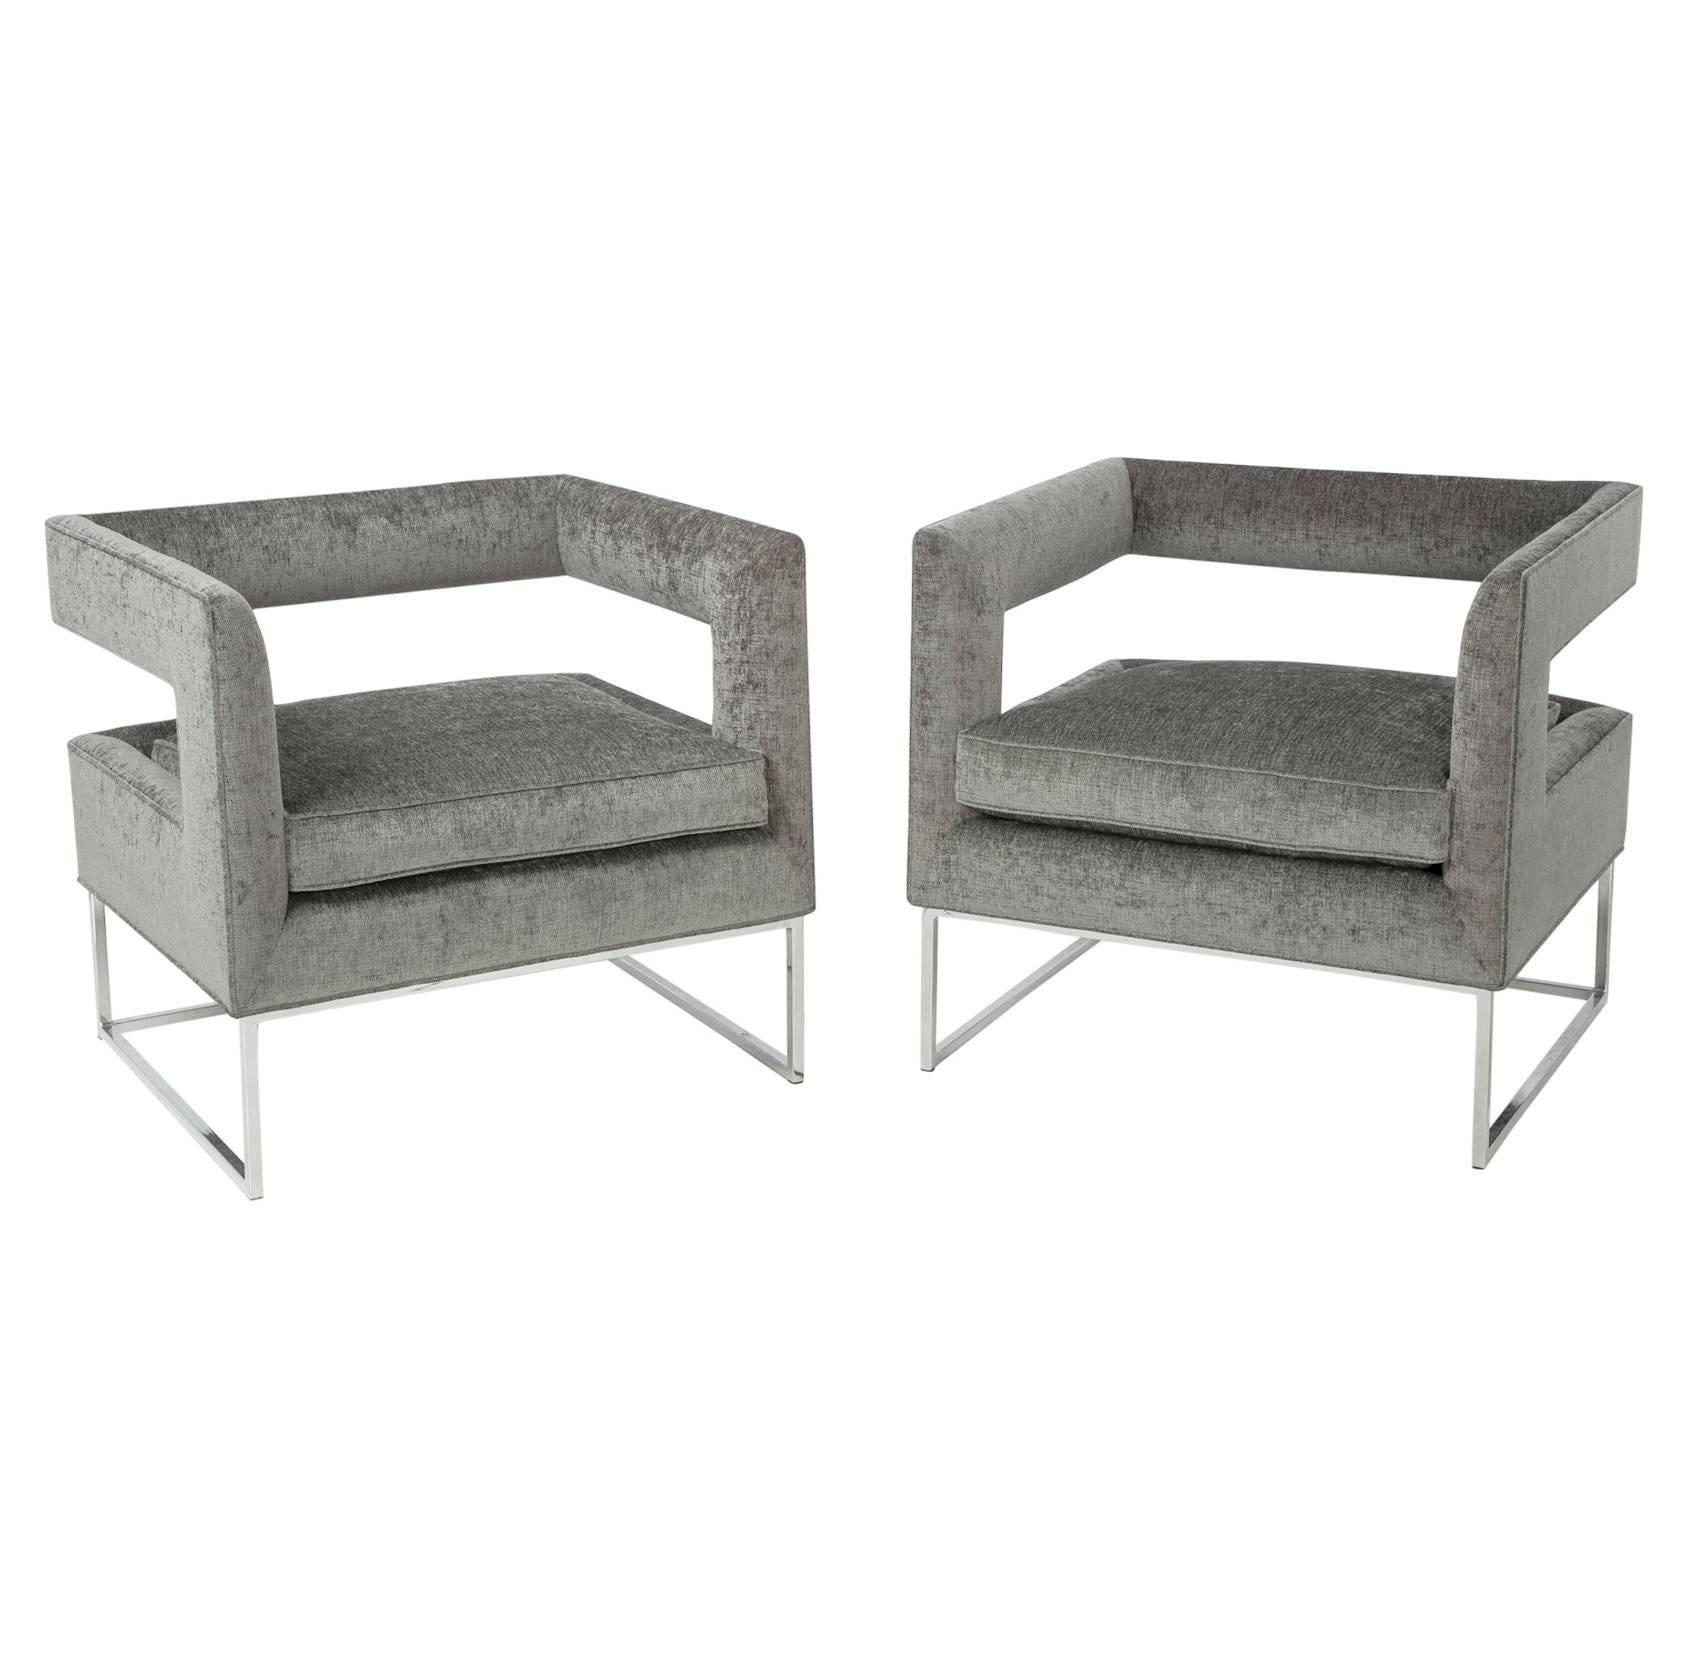 Meticulously and expertly restored in a soft and luxurious chenille, this pair of grey floating cube chairs by Milo Baughman is ready to be placed into any high end home, office or studio.

The chrome base is in excellent original condition and is